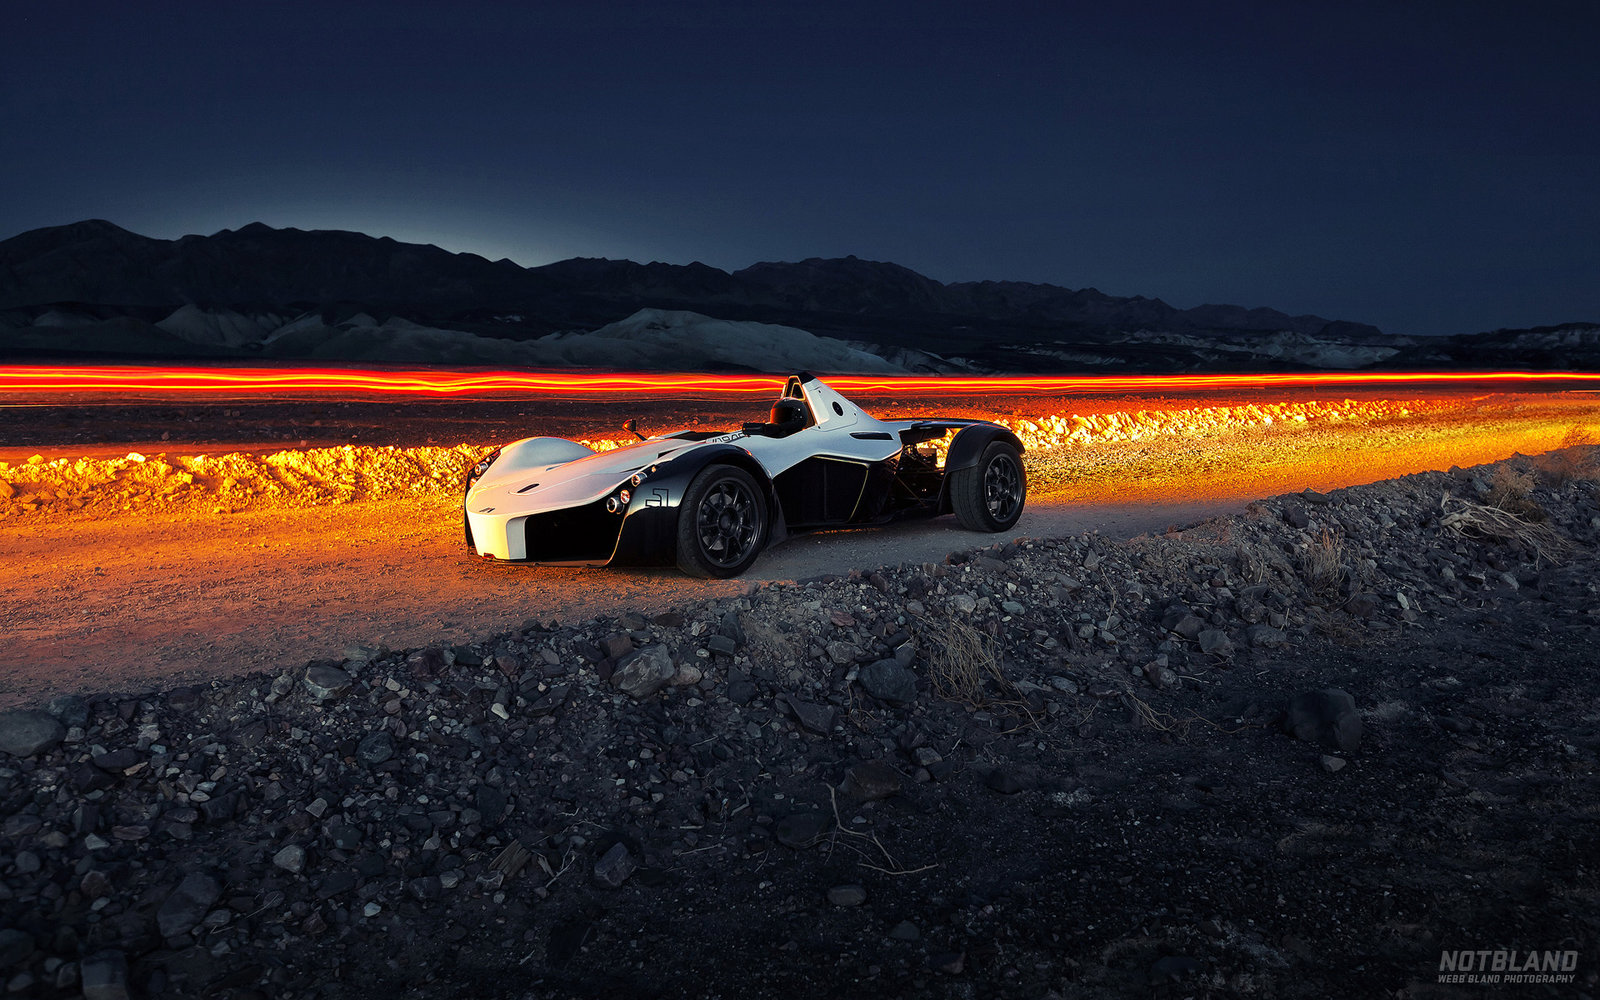 BAC Mono In Death Valley, CA by notbland